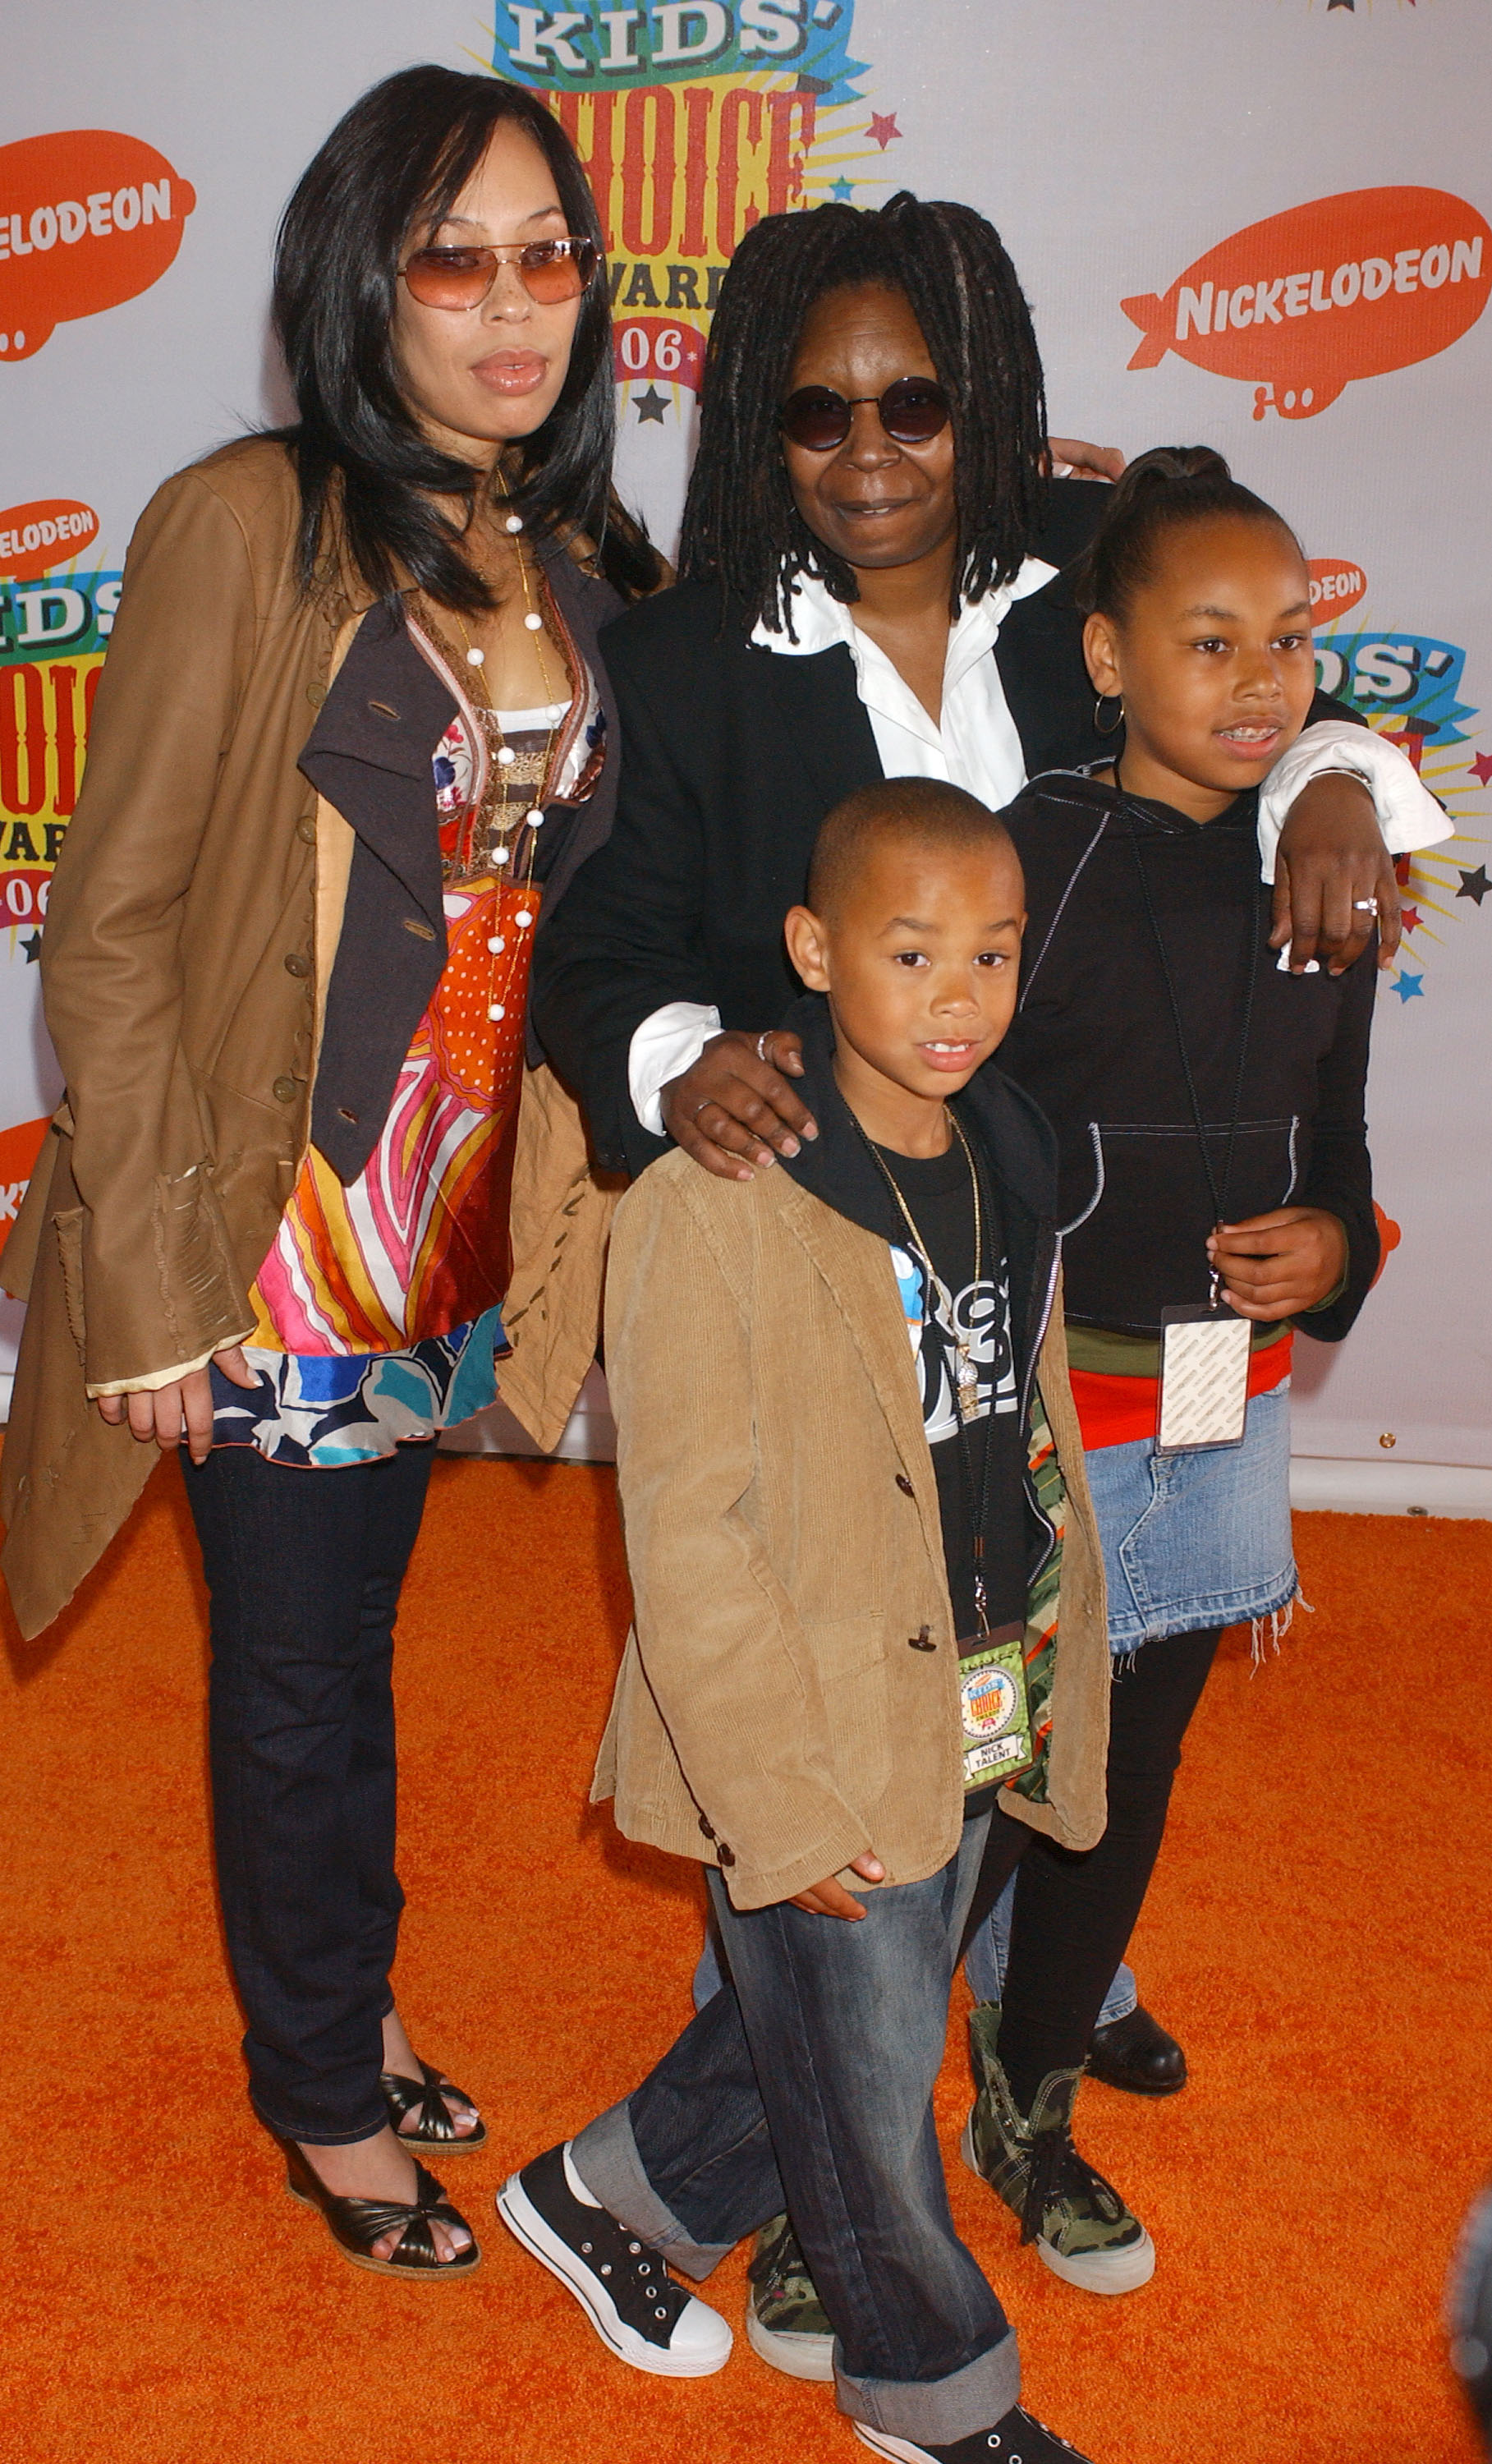 Alex Martin, Whoopi Goldberg and family during Nickelodeon’s 19th Annual Kids’ Choice Awards